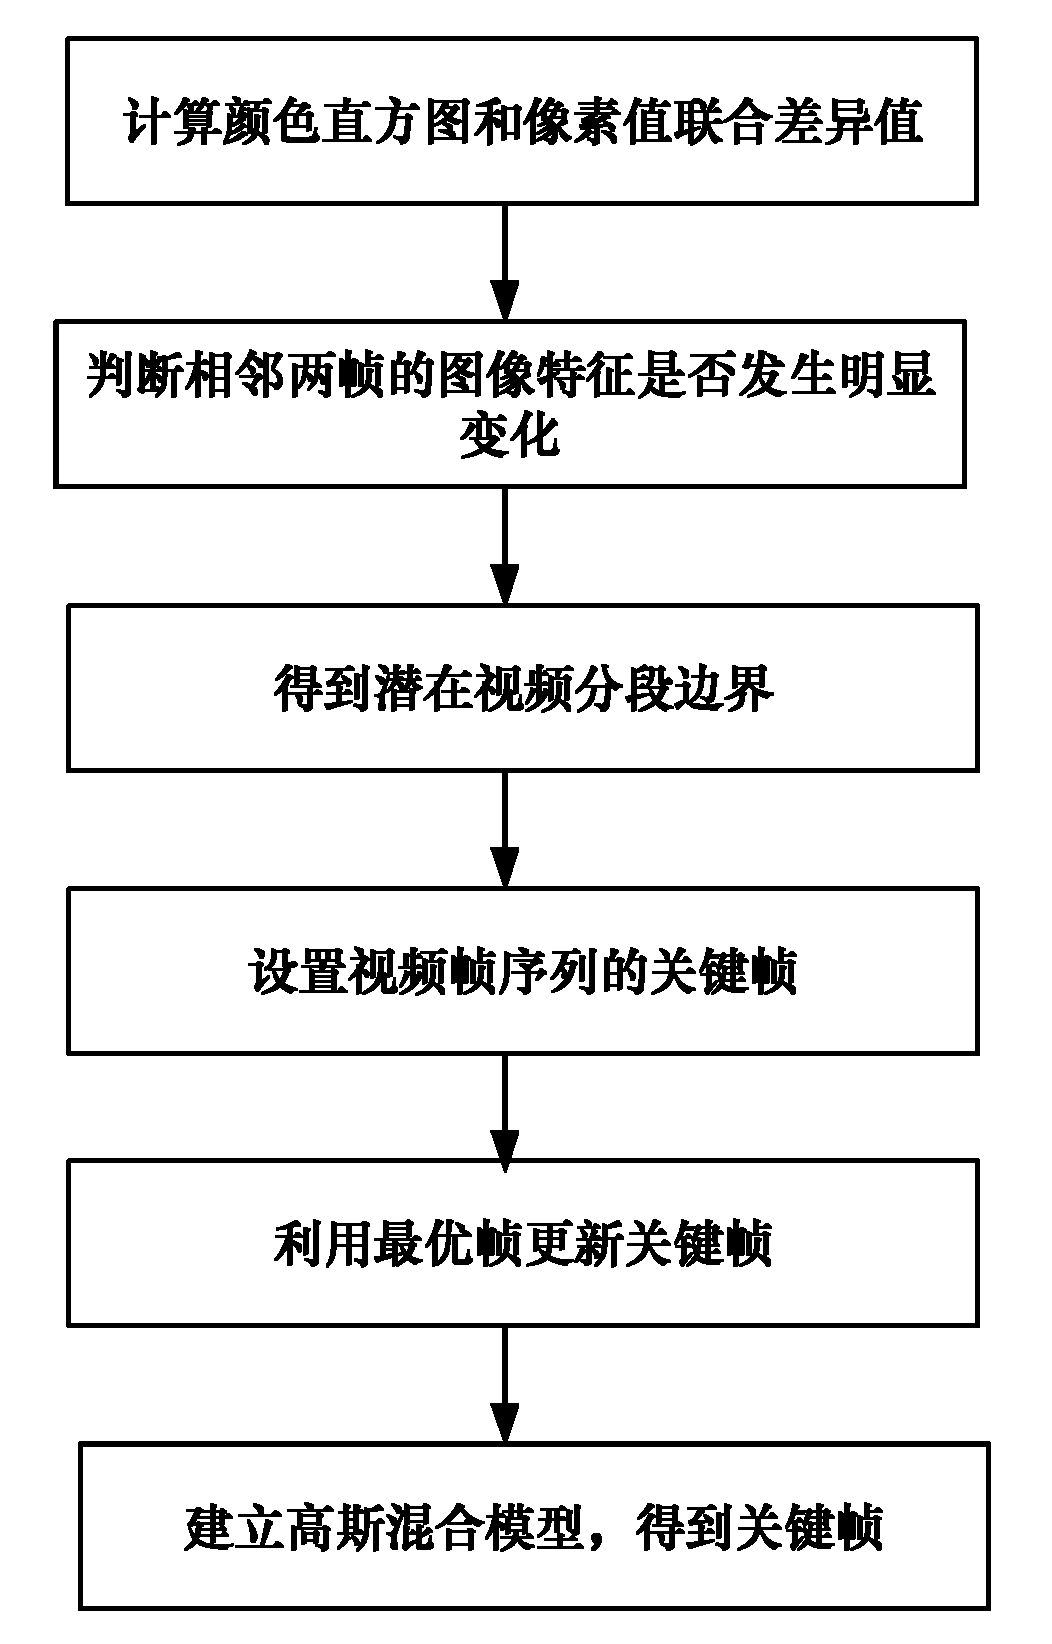 Real-time video abstract generation method based on user preferences